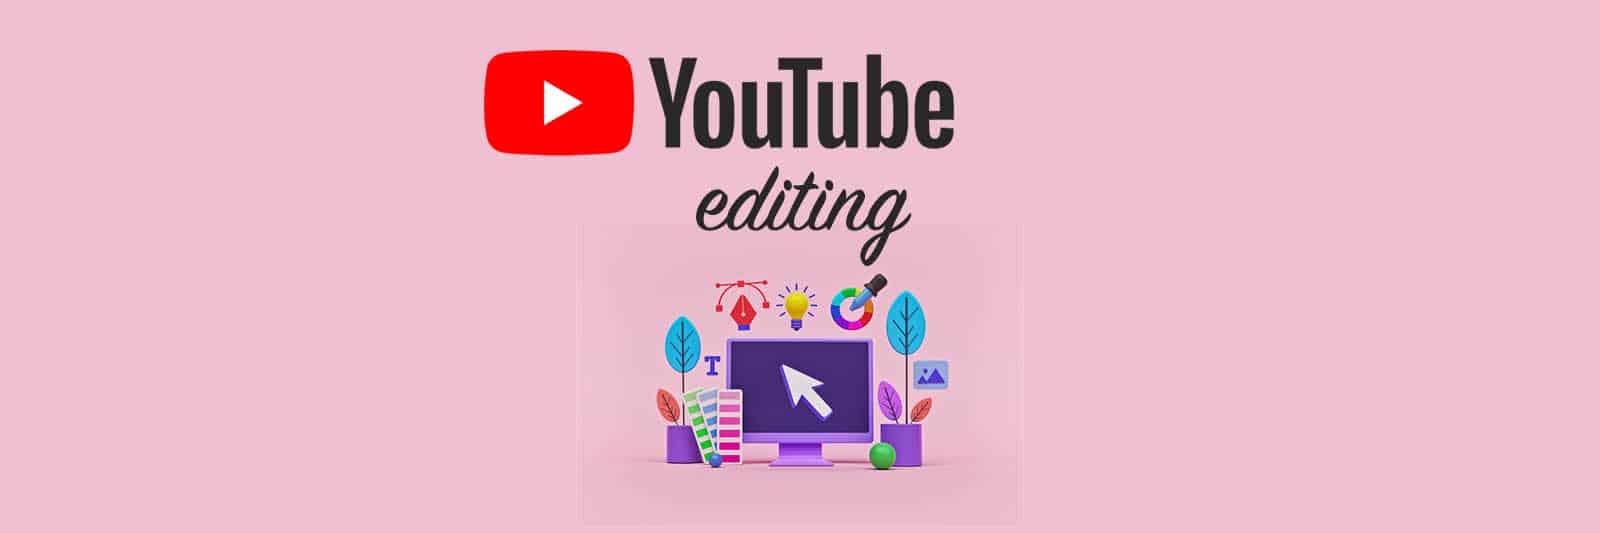 What Is The Editing Software That Youtubers Use